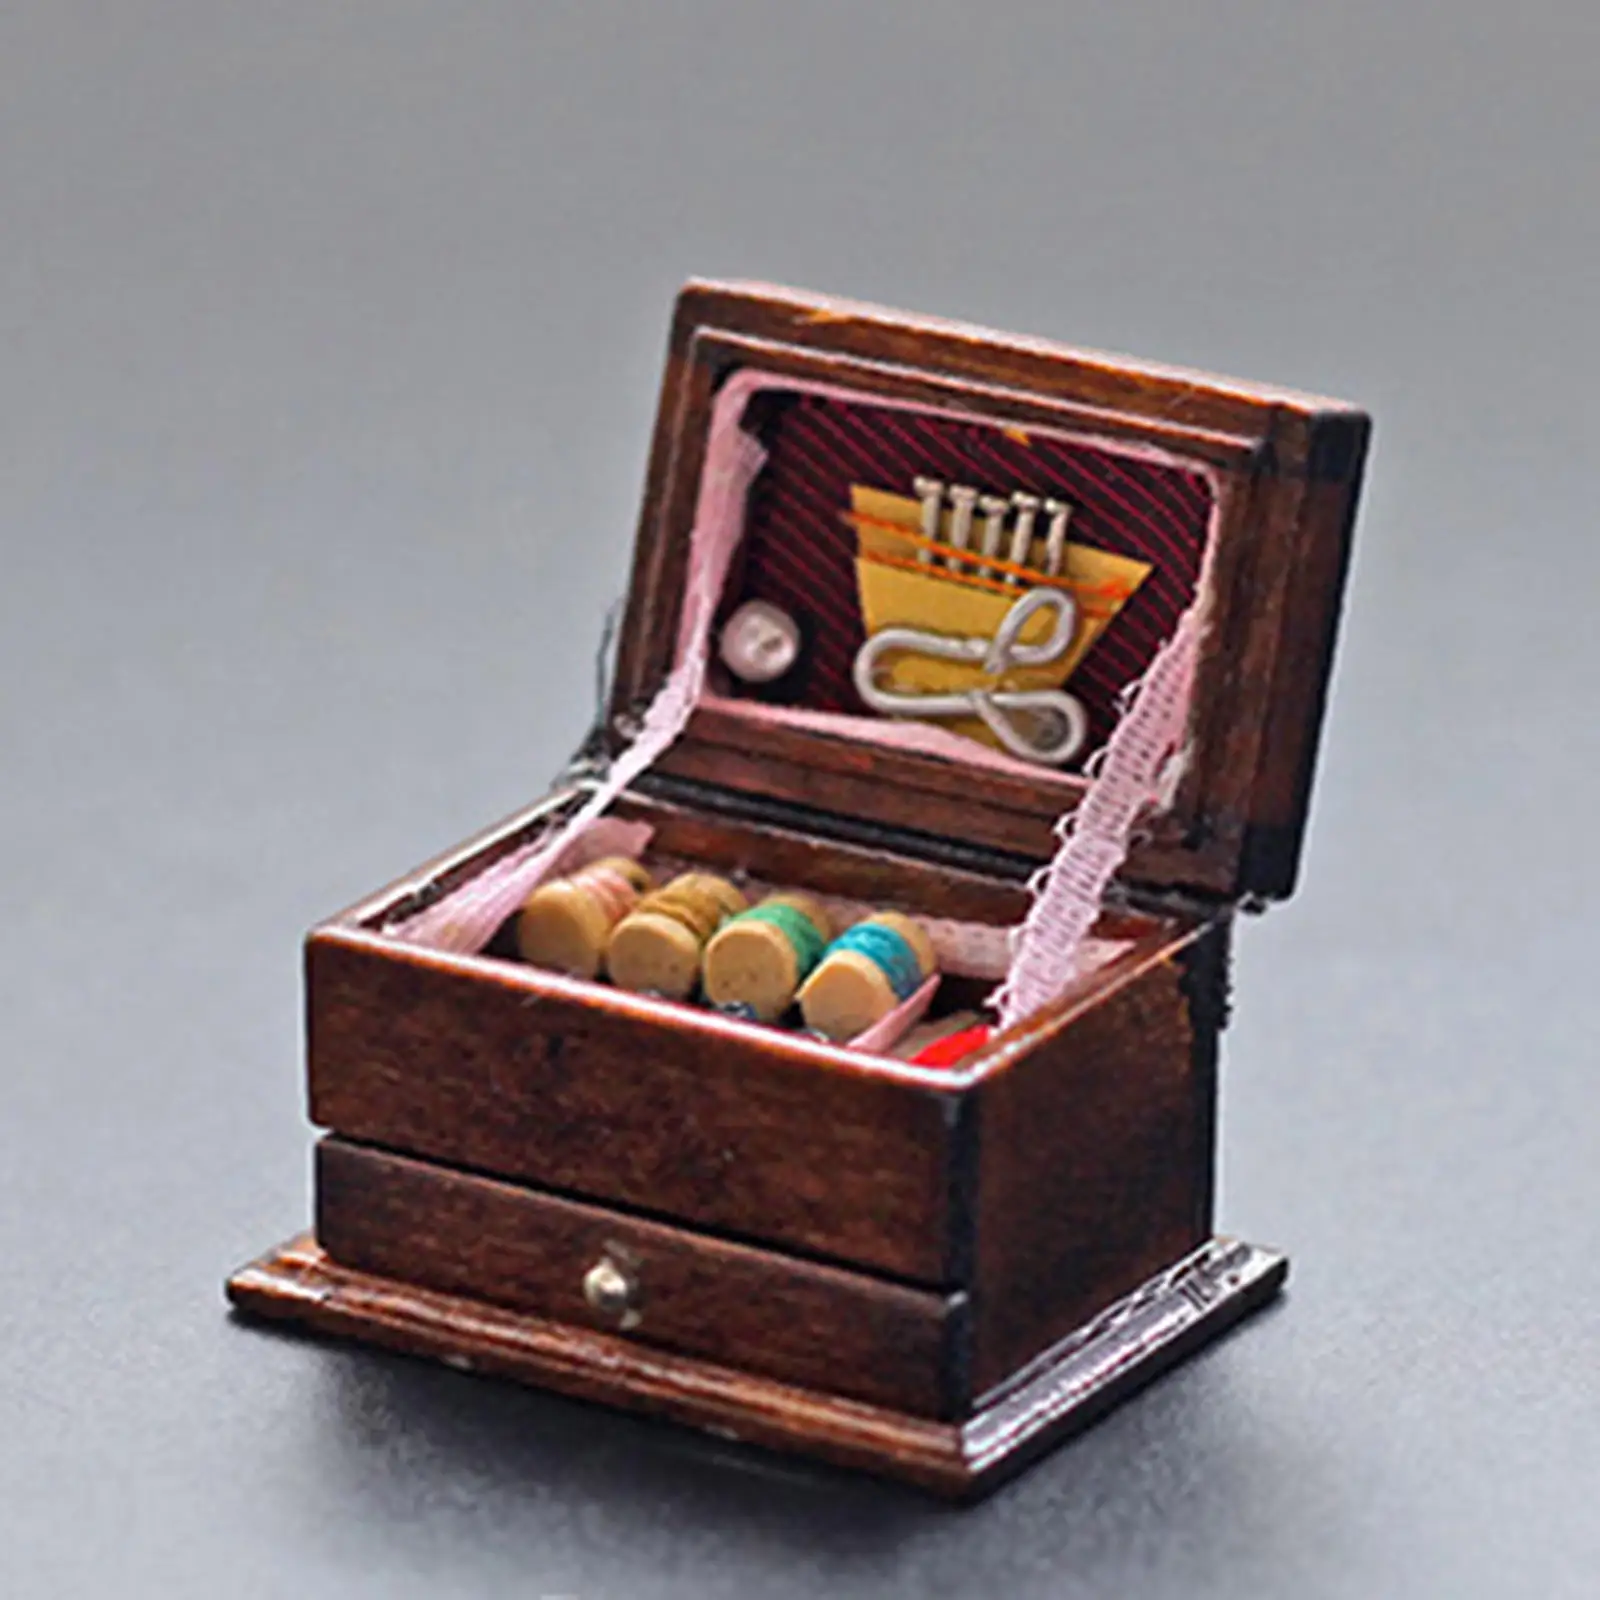 Handcrafted Miniature Vintage Sewing Box Dollhouse Miniature Decor Miniature Sewing Kit Furniture Set